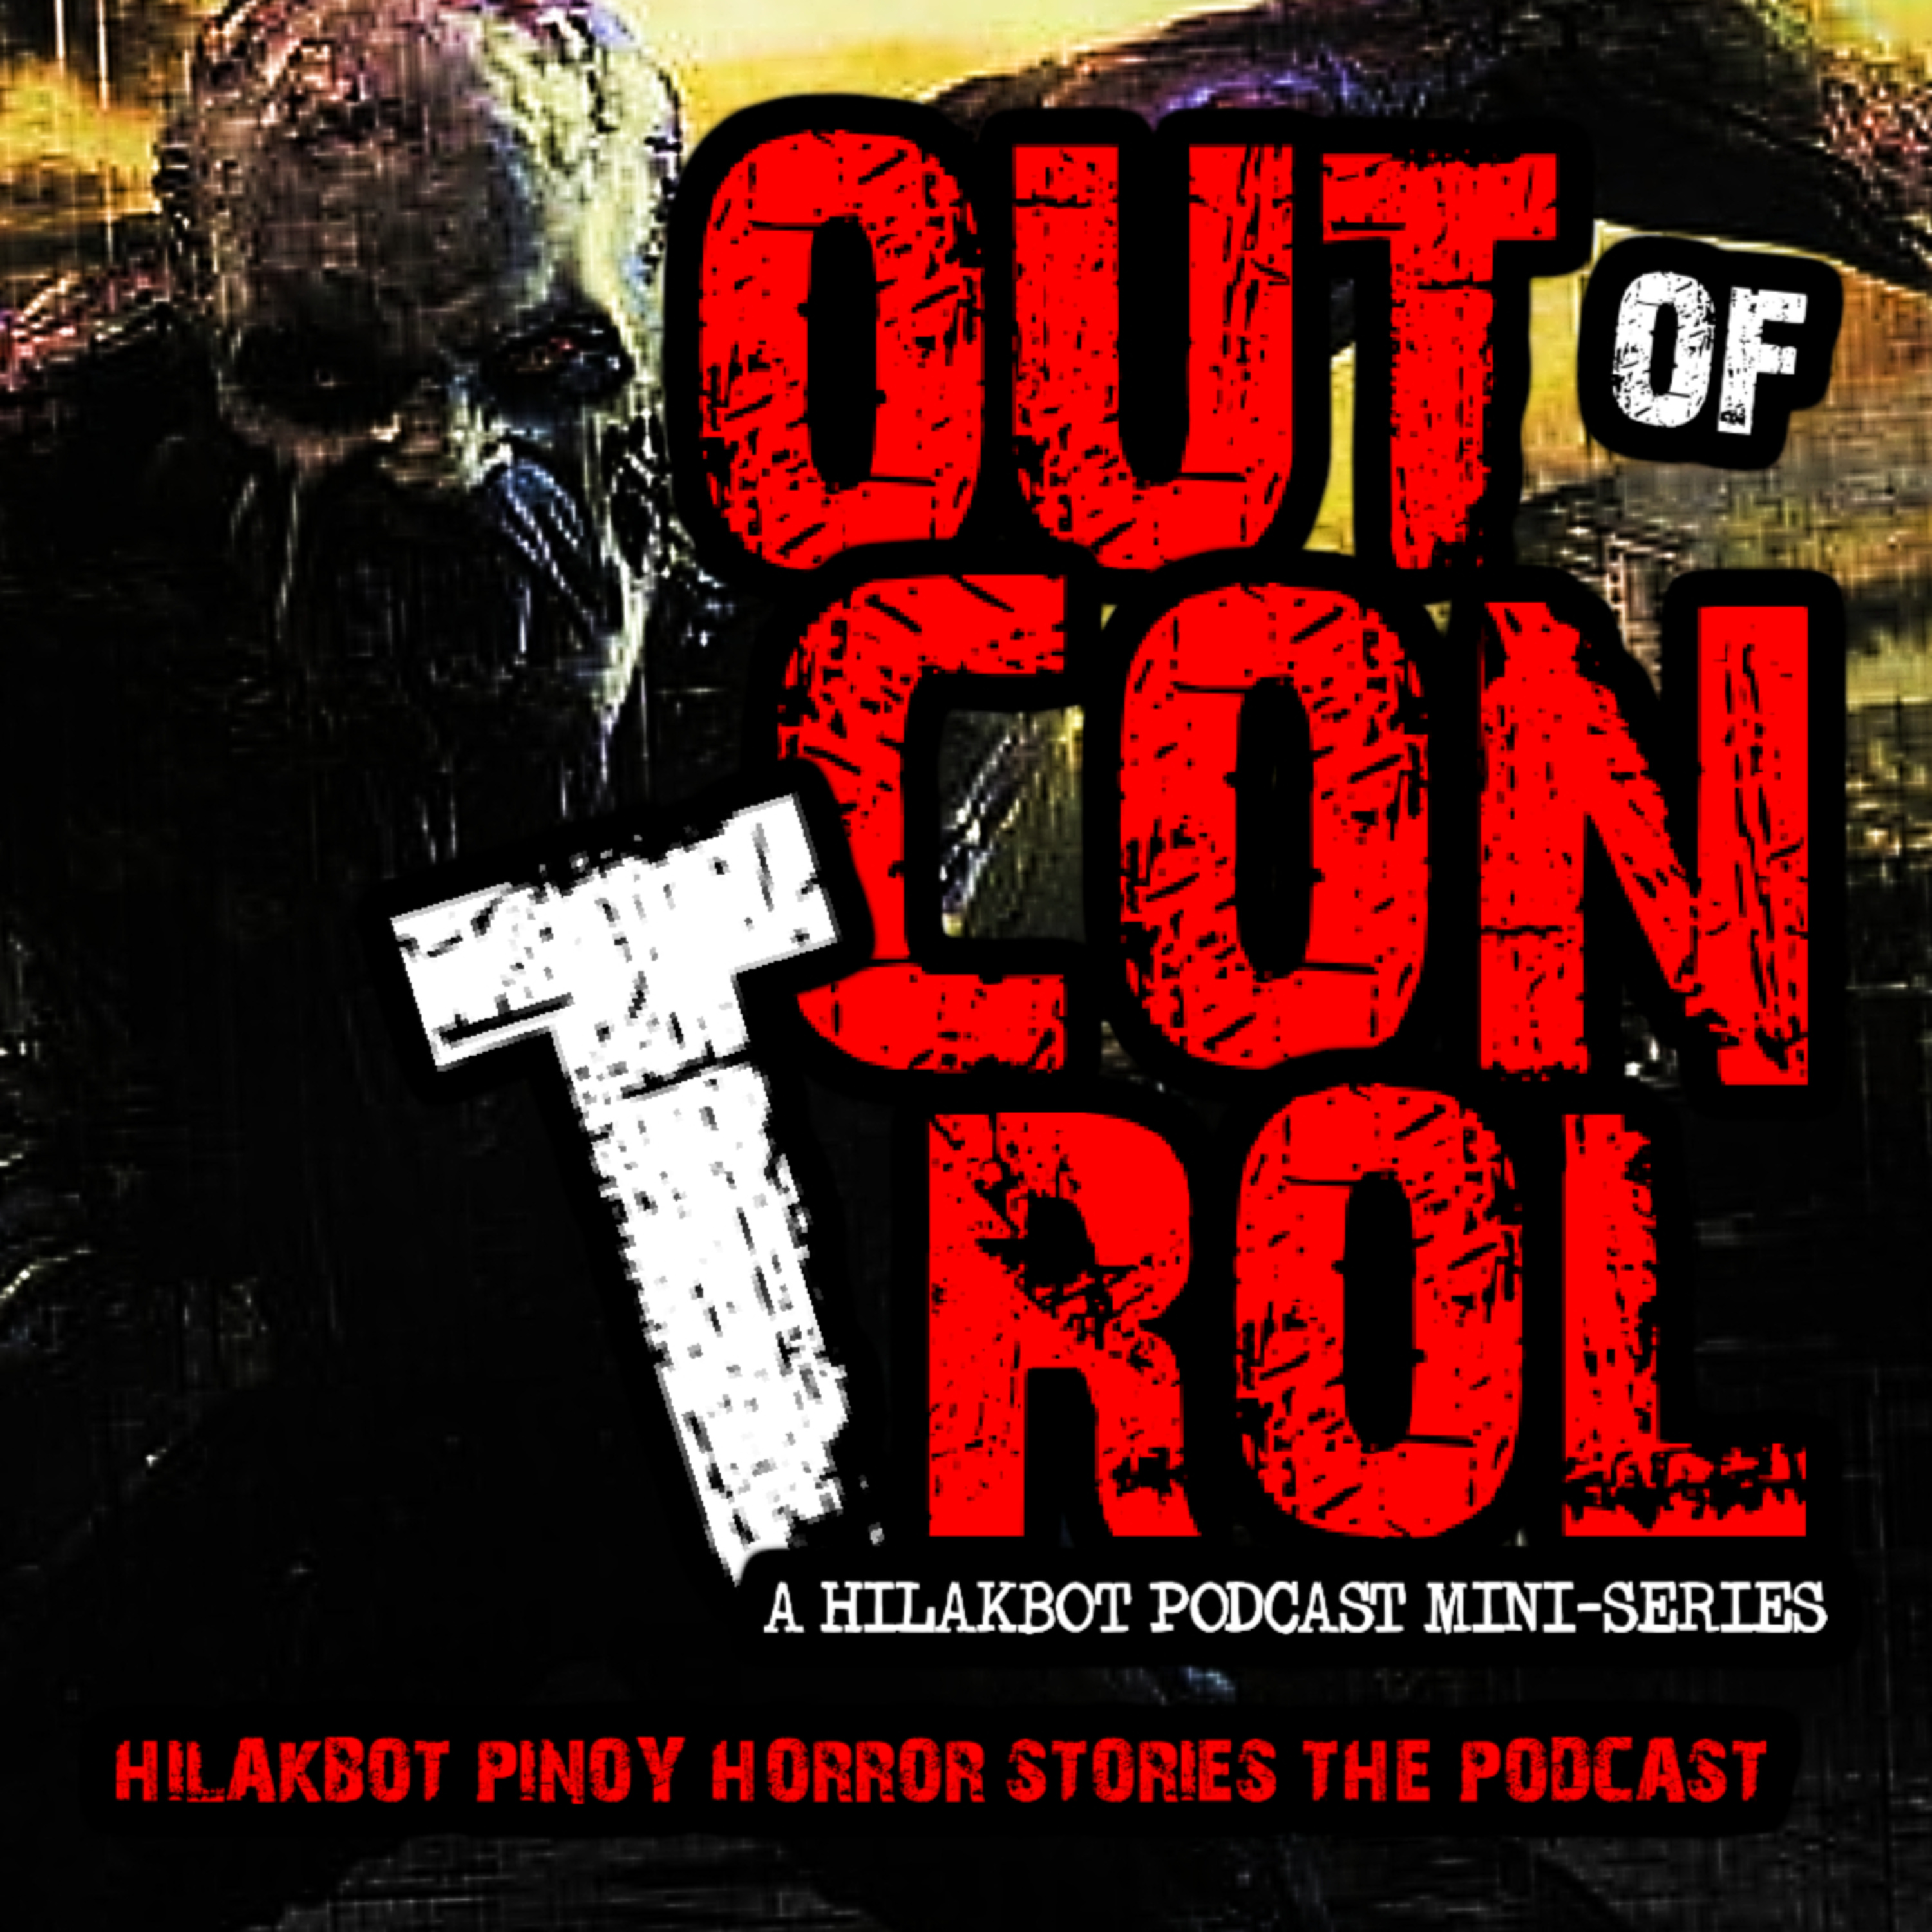 OUT OF CONTROL (Part 1) | Fiction Zombie Story